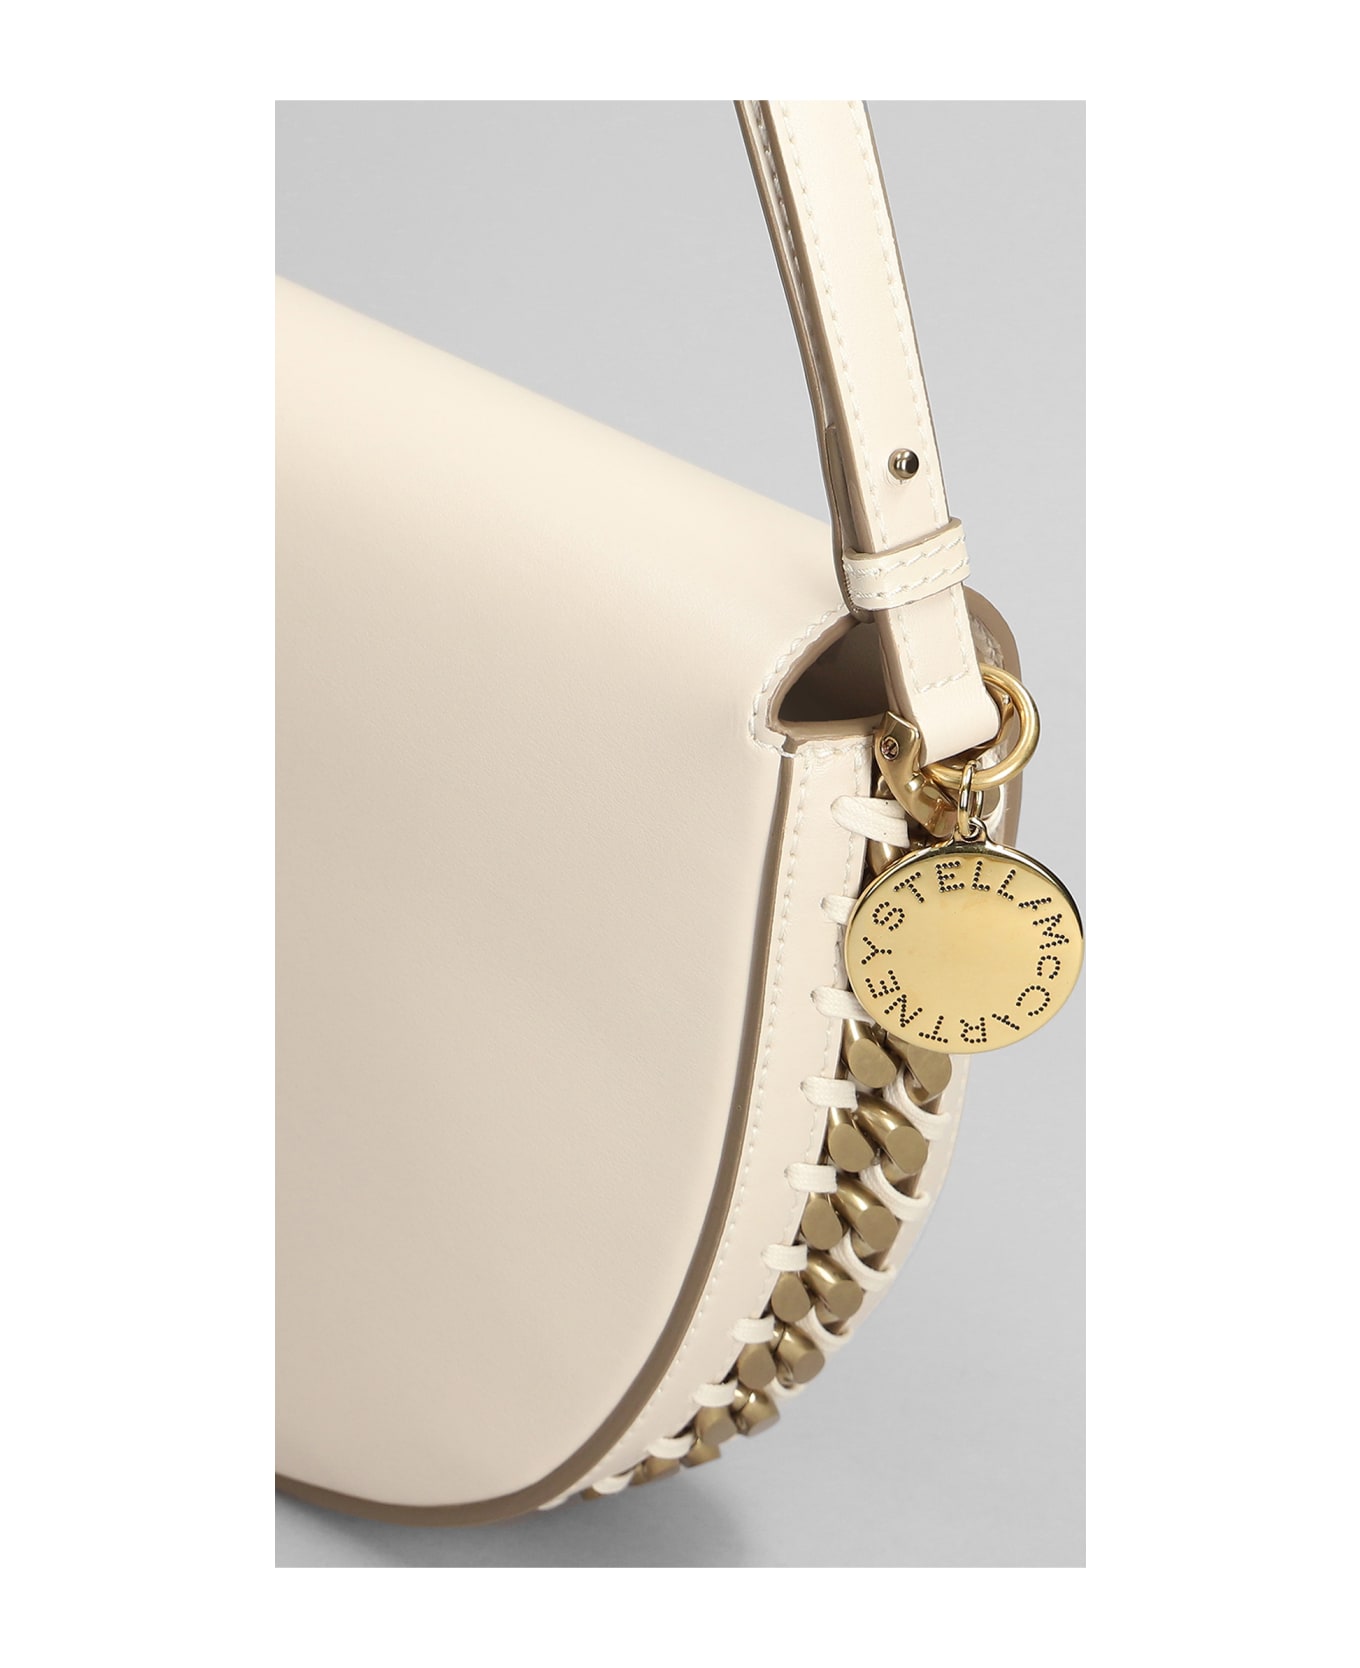 Stella McCartney Shoulder Bag In White Faux Leather - white トートバッグ